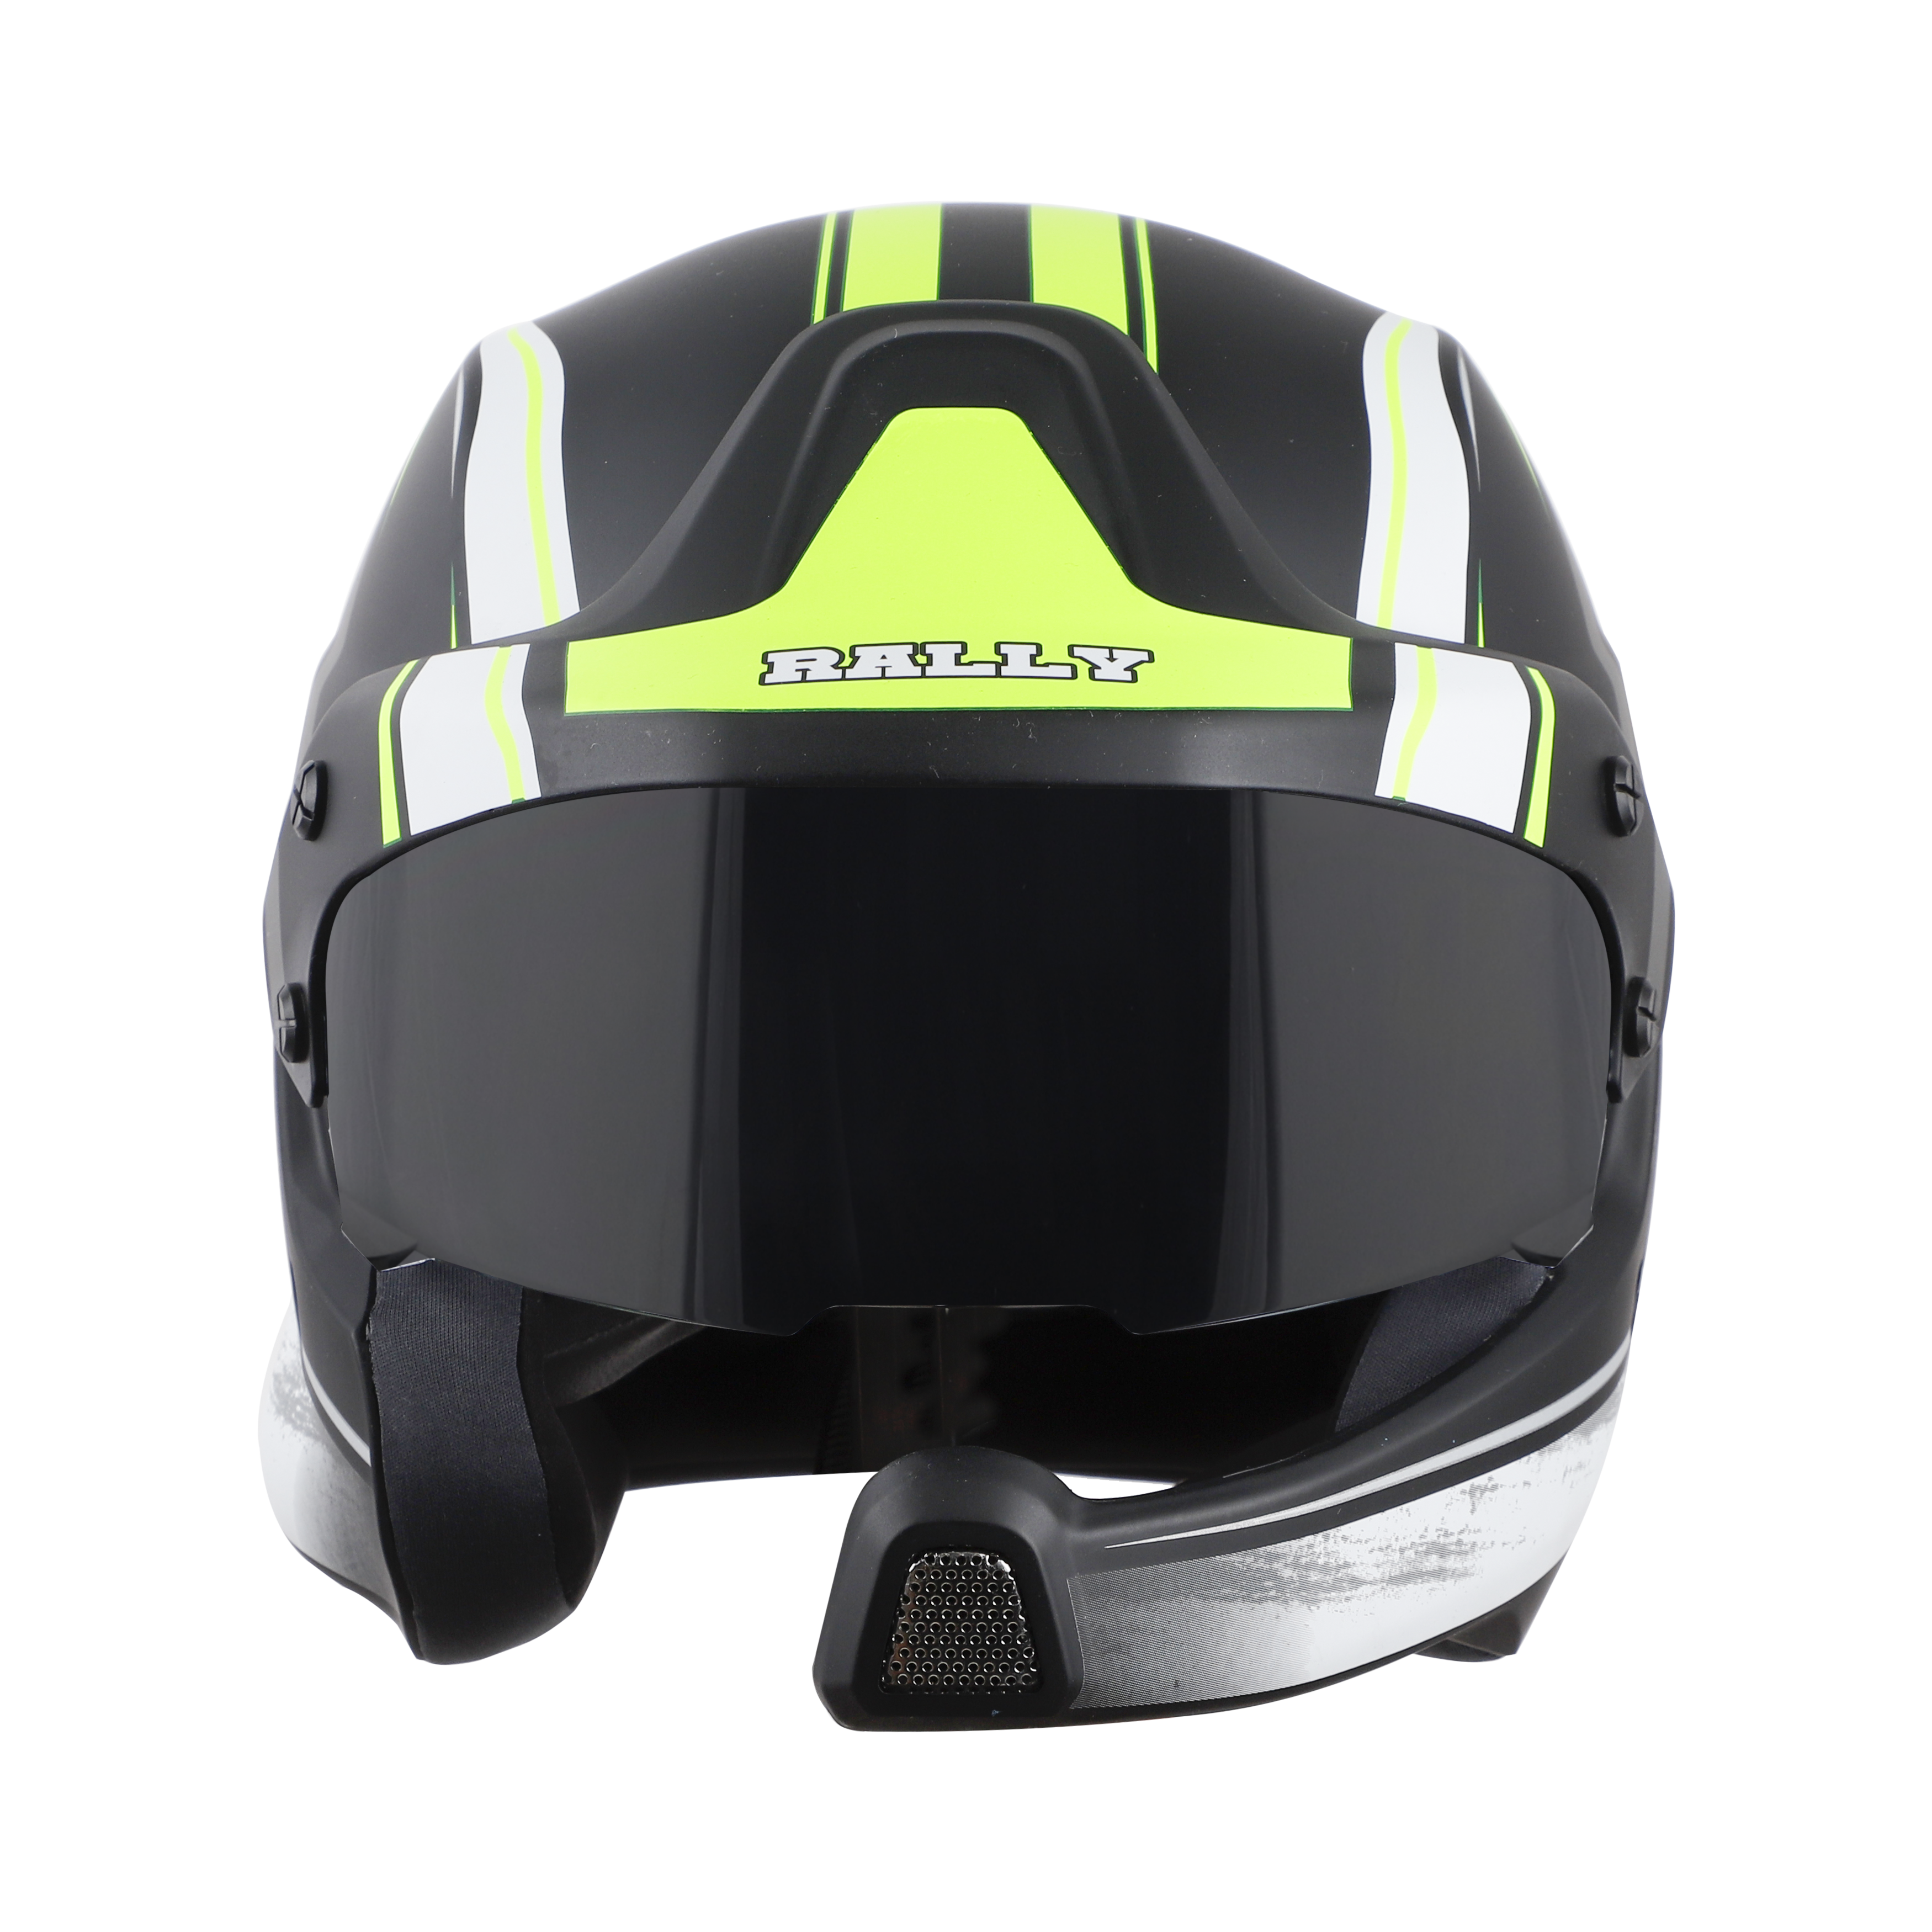 SB-51 RALLY RUT GLOSSY BLACK WITH NEON ( FITTED WITH CLEAR VISOR EXTRA SMOKE VISOR FREE)